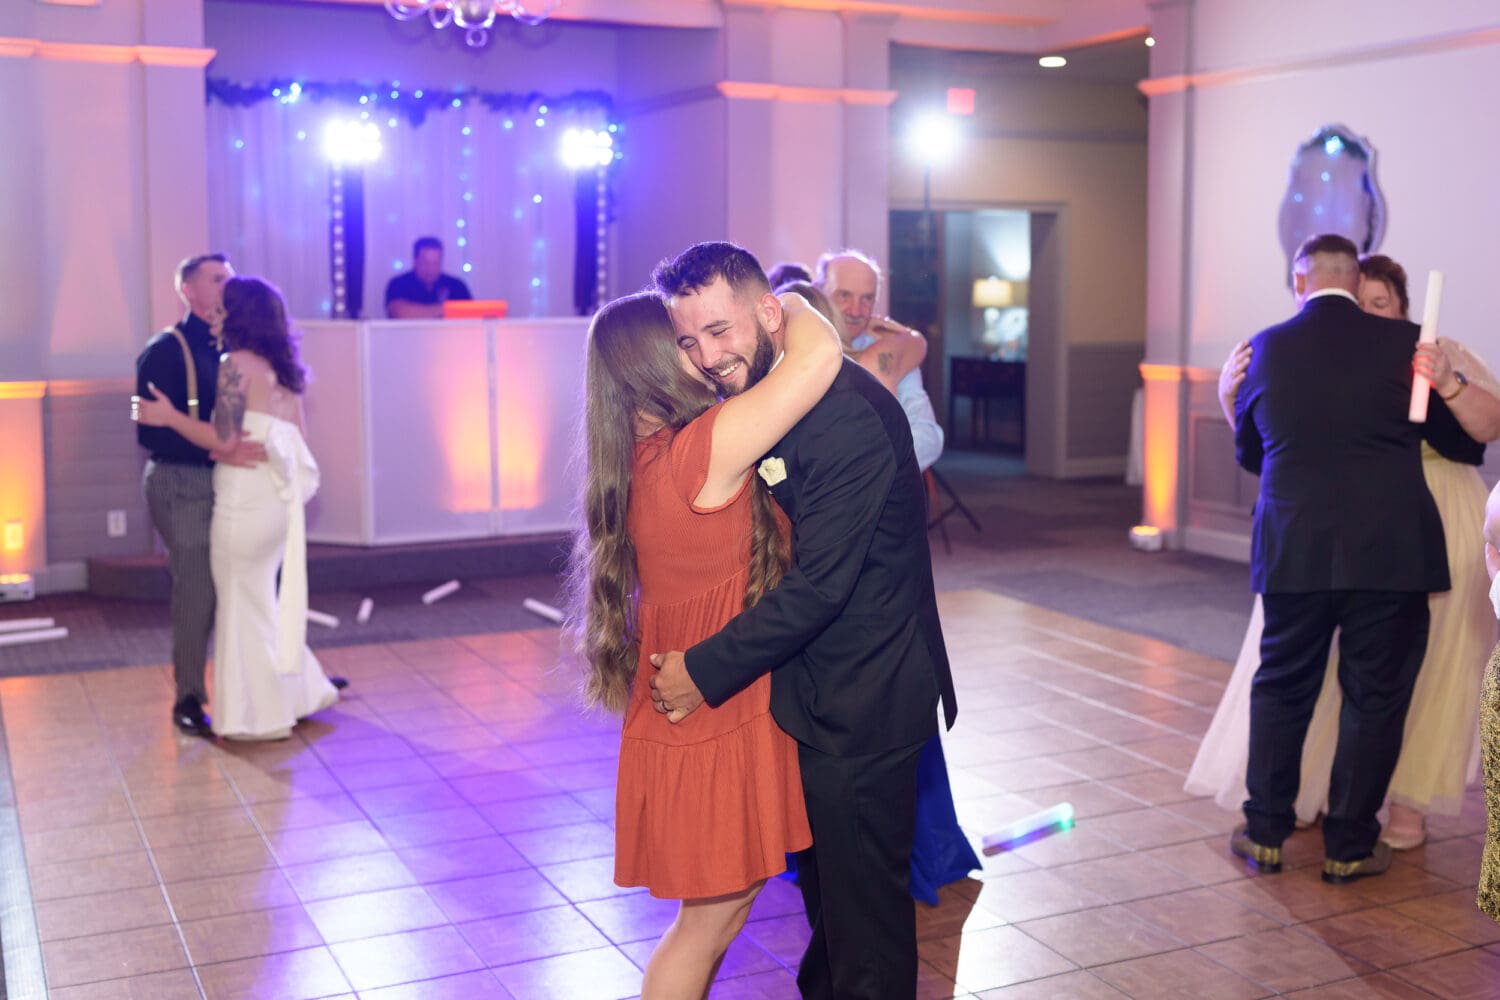 Fun dancing during the reception - Litchfield Country Club